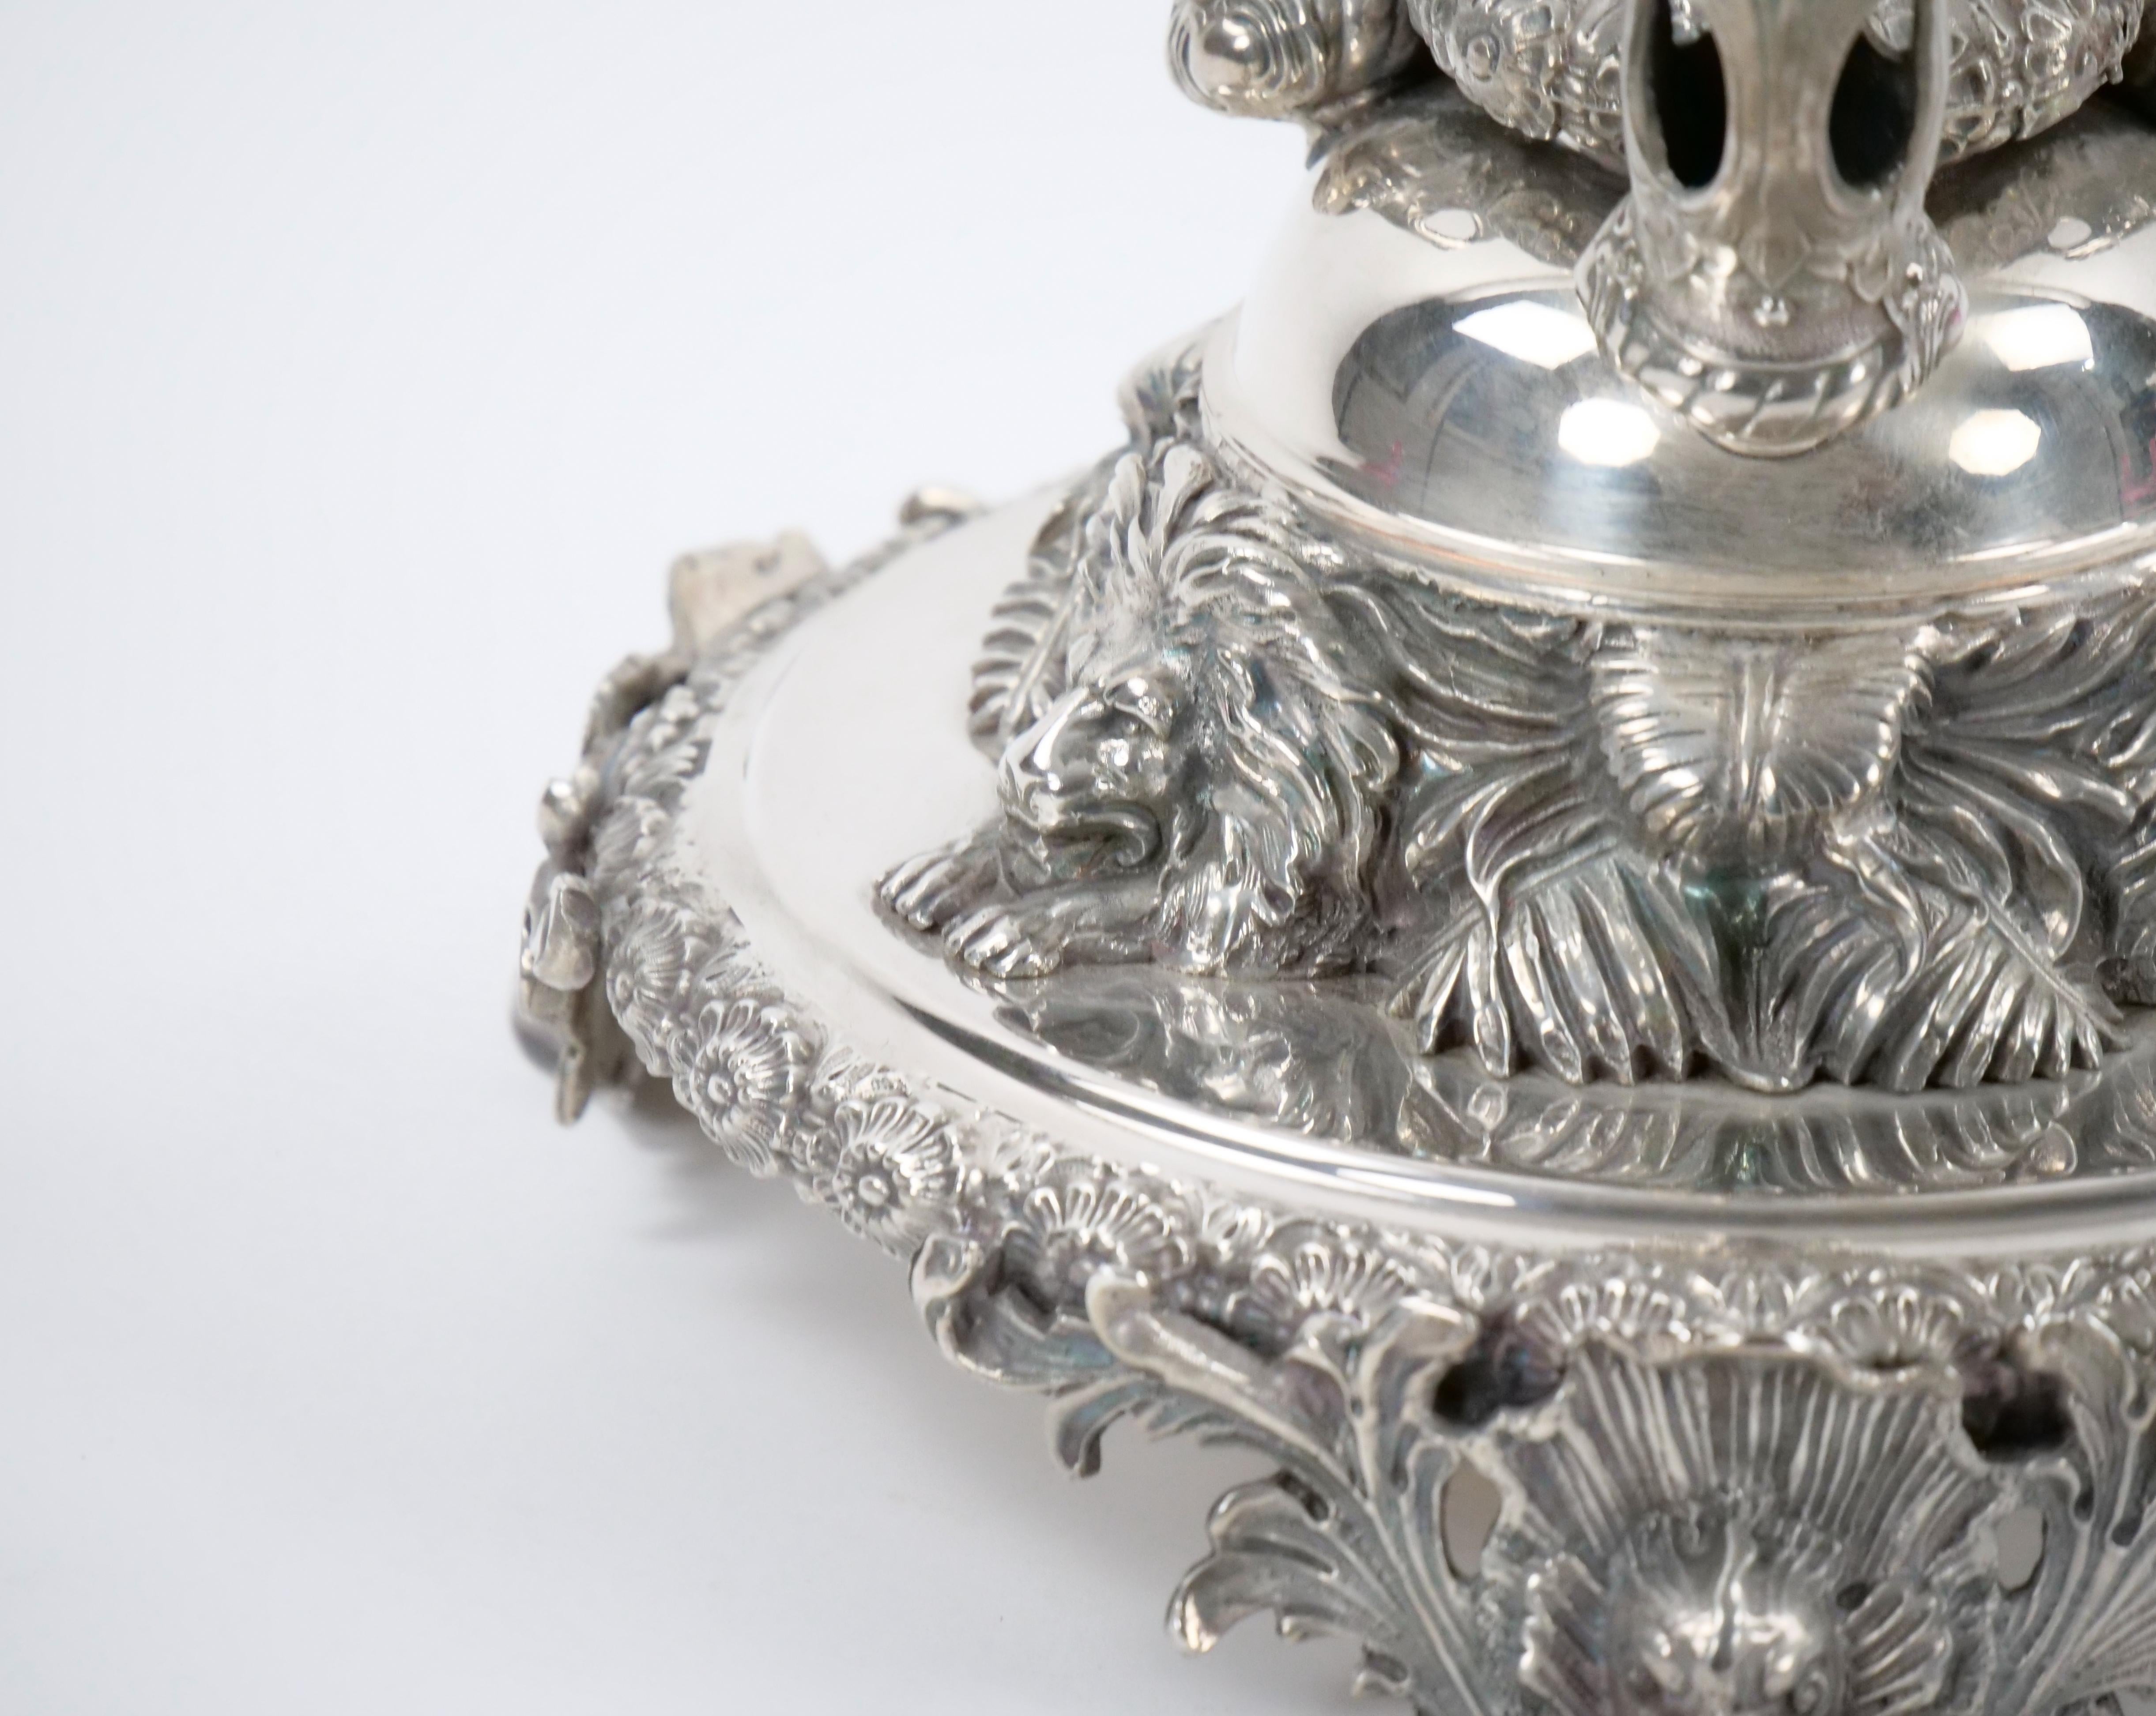 19th Century Georgian Old English Silver Plate and Glass Epergne Centerpiece For Sale 11